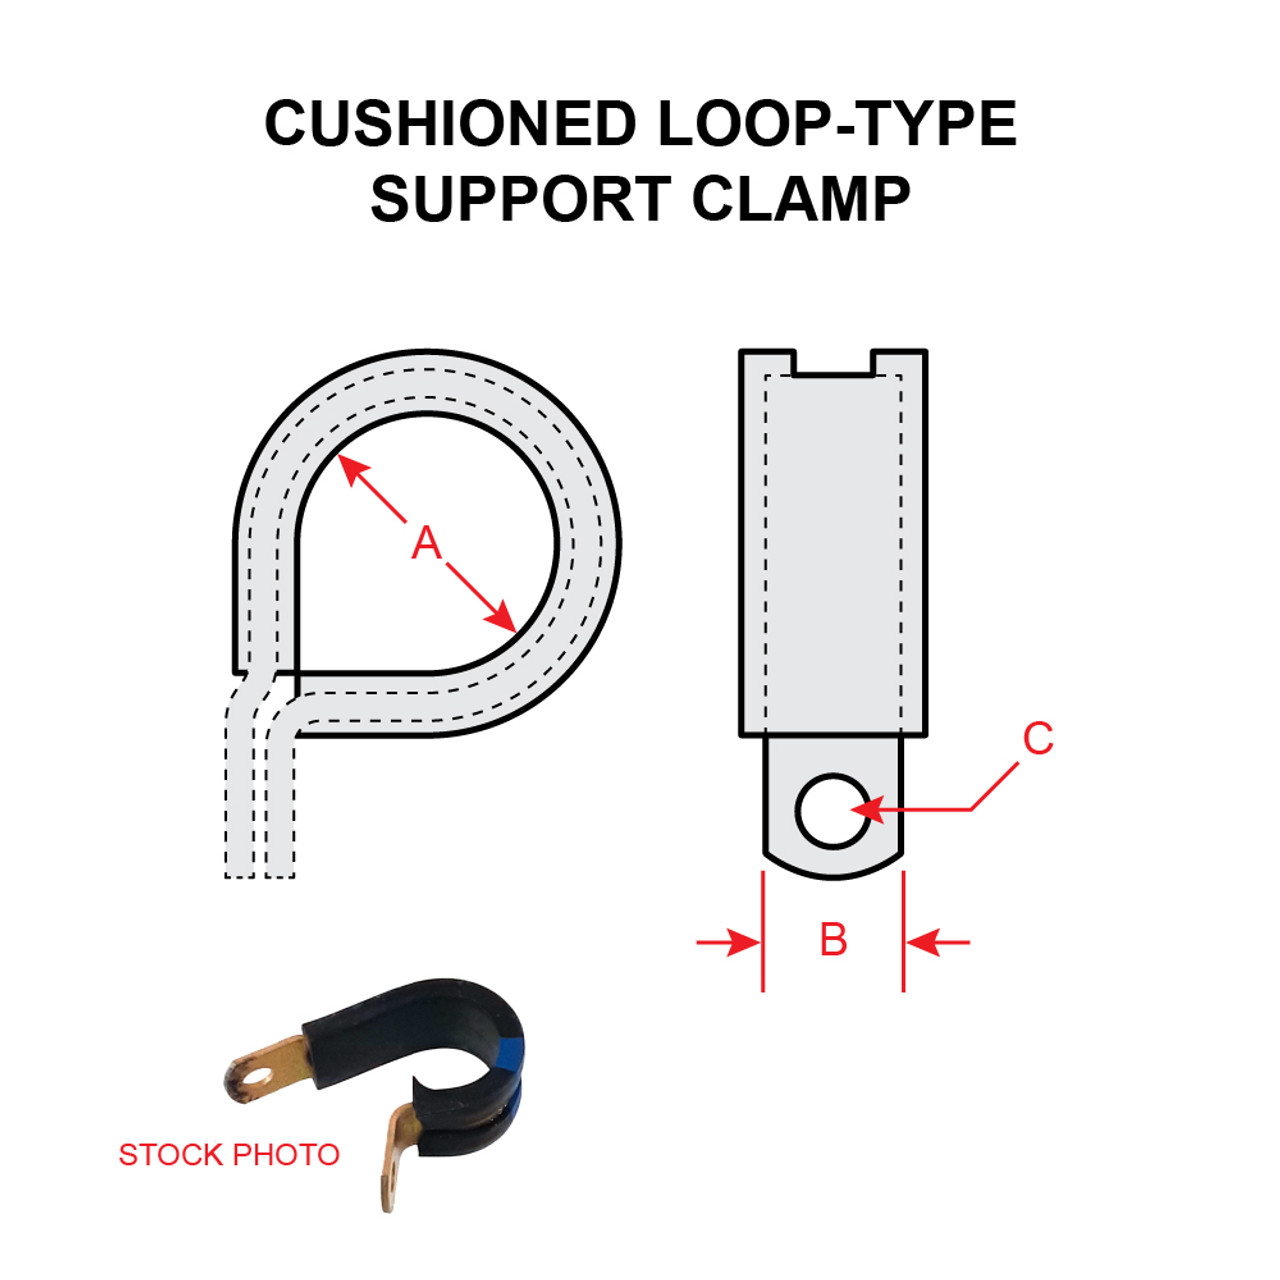 MS21919WDG3   LOOP-TYPE SUPPORT CLAMP - CUSHIONED